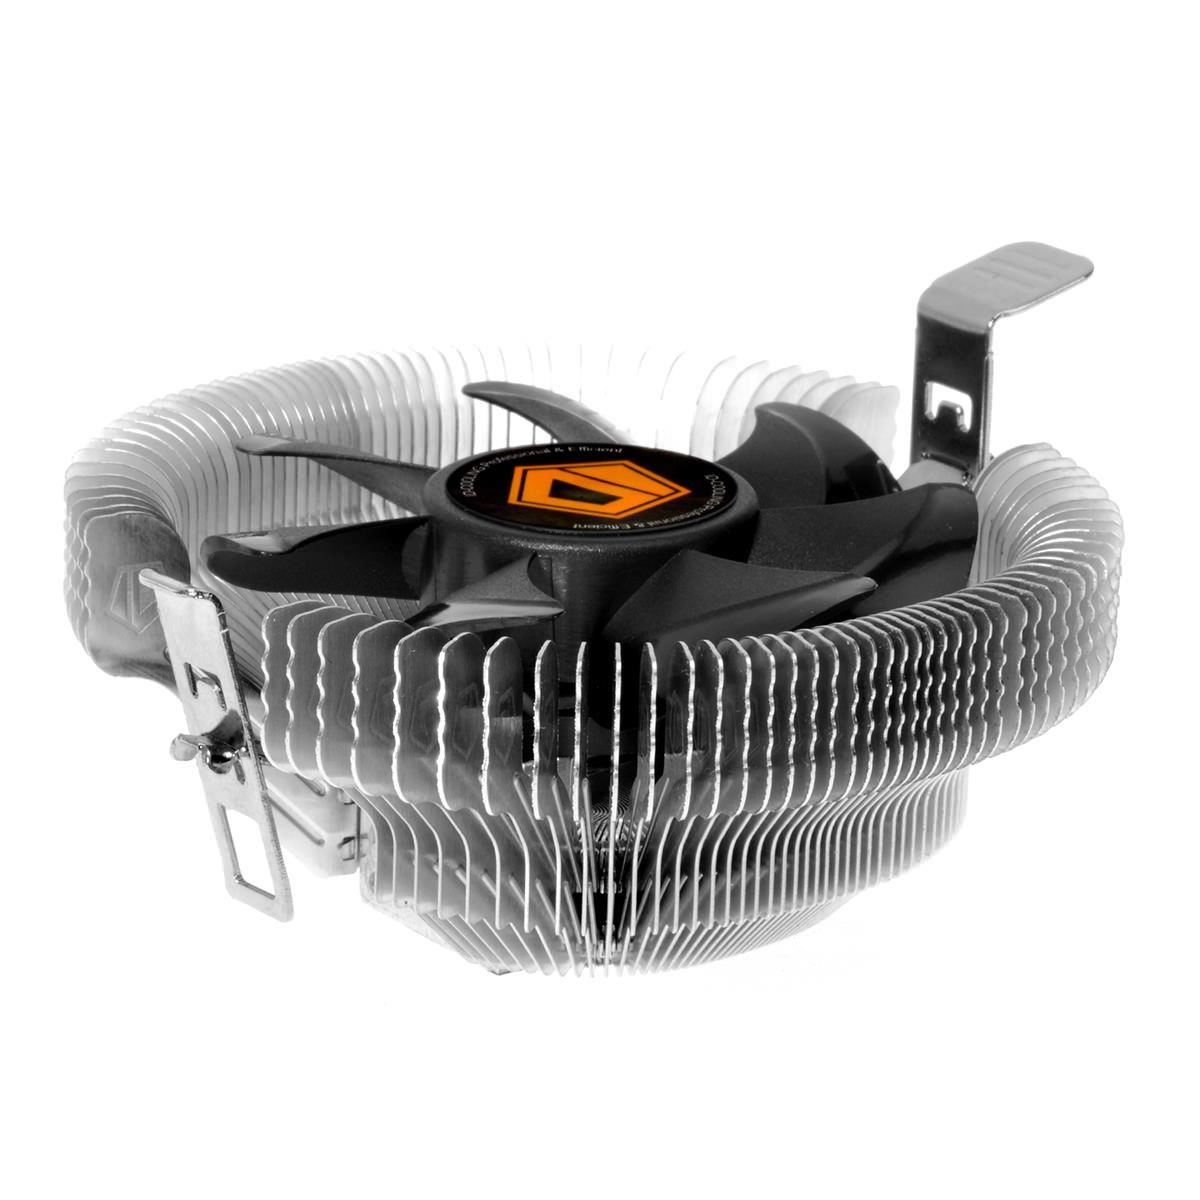 Кулер город. ID-Cooling dk-01s. Cooler ID-Cooling dk-01t. Кулер dk -01t. Кулер CPU ID-Cooling.